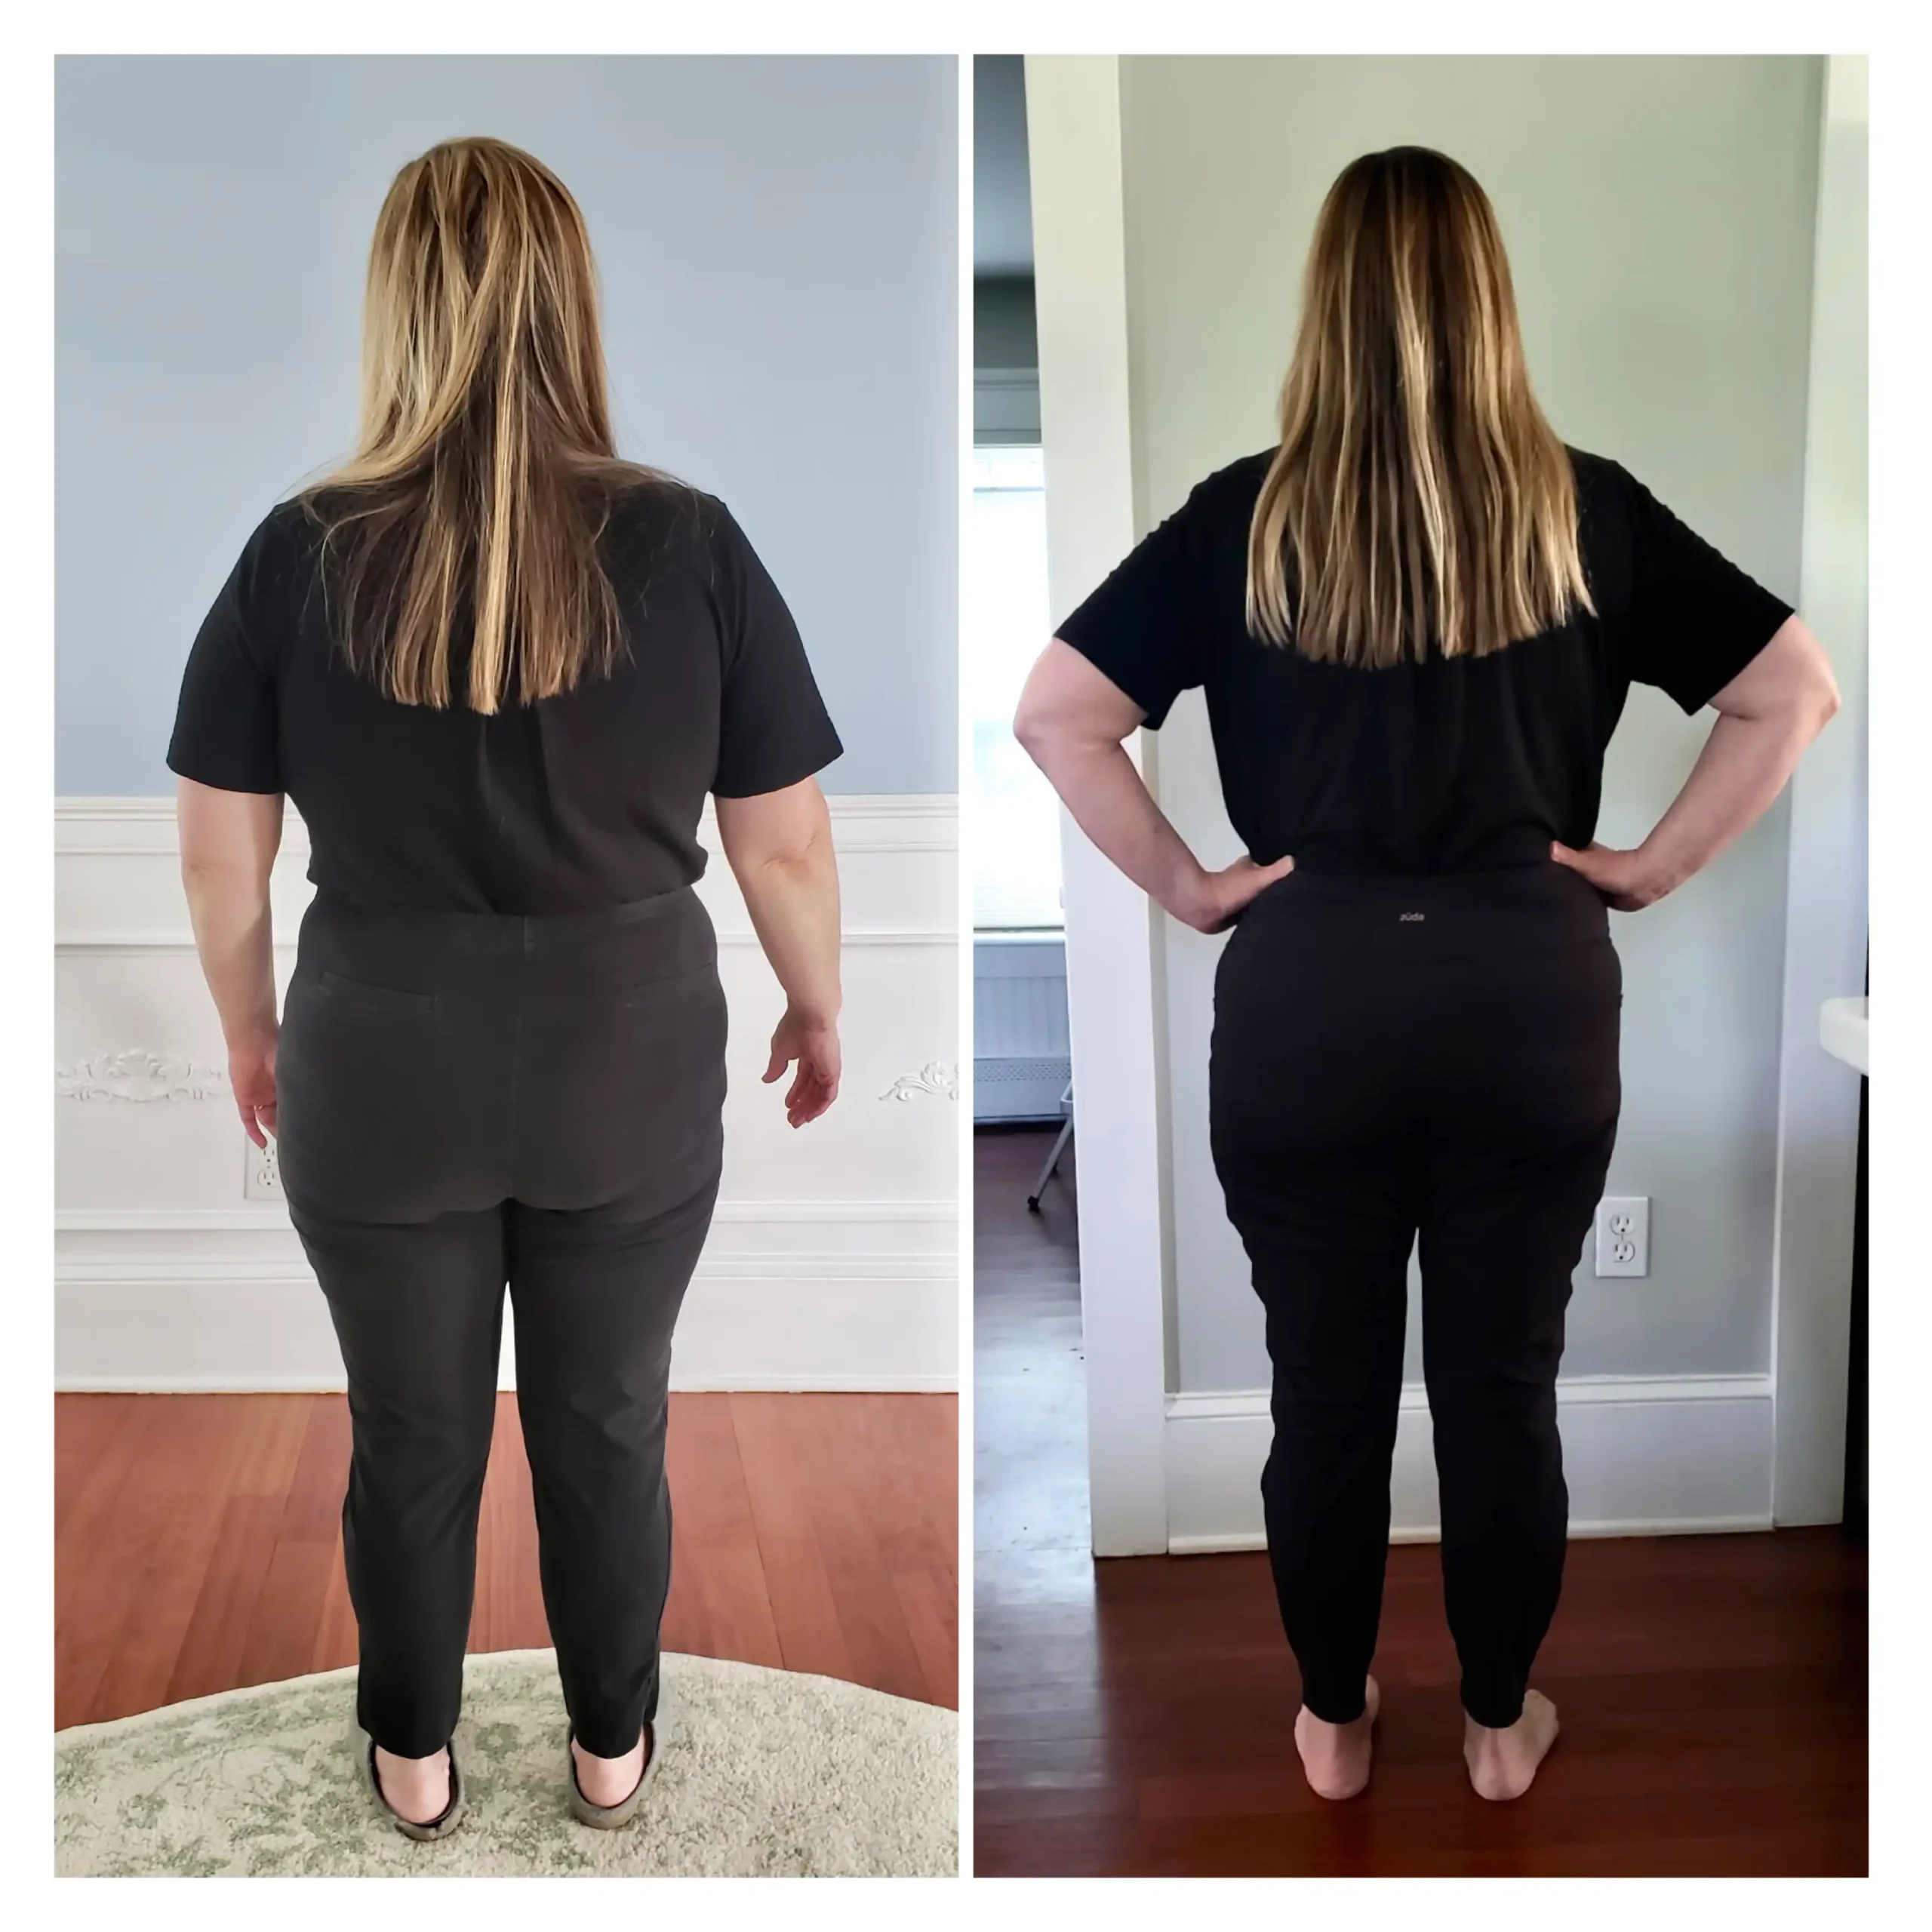 Donna O before and after weight loss back view